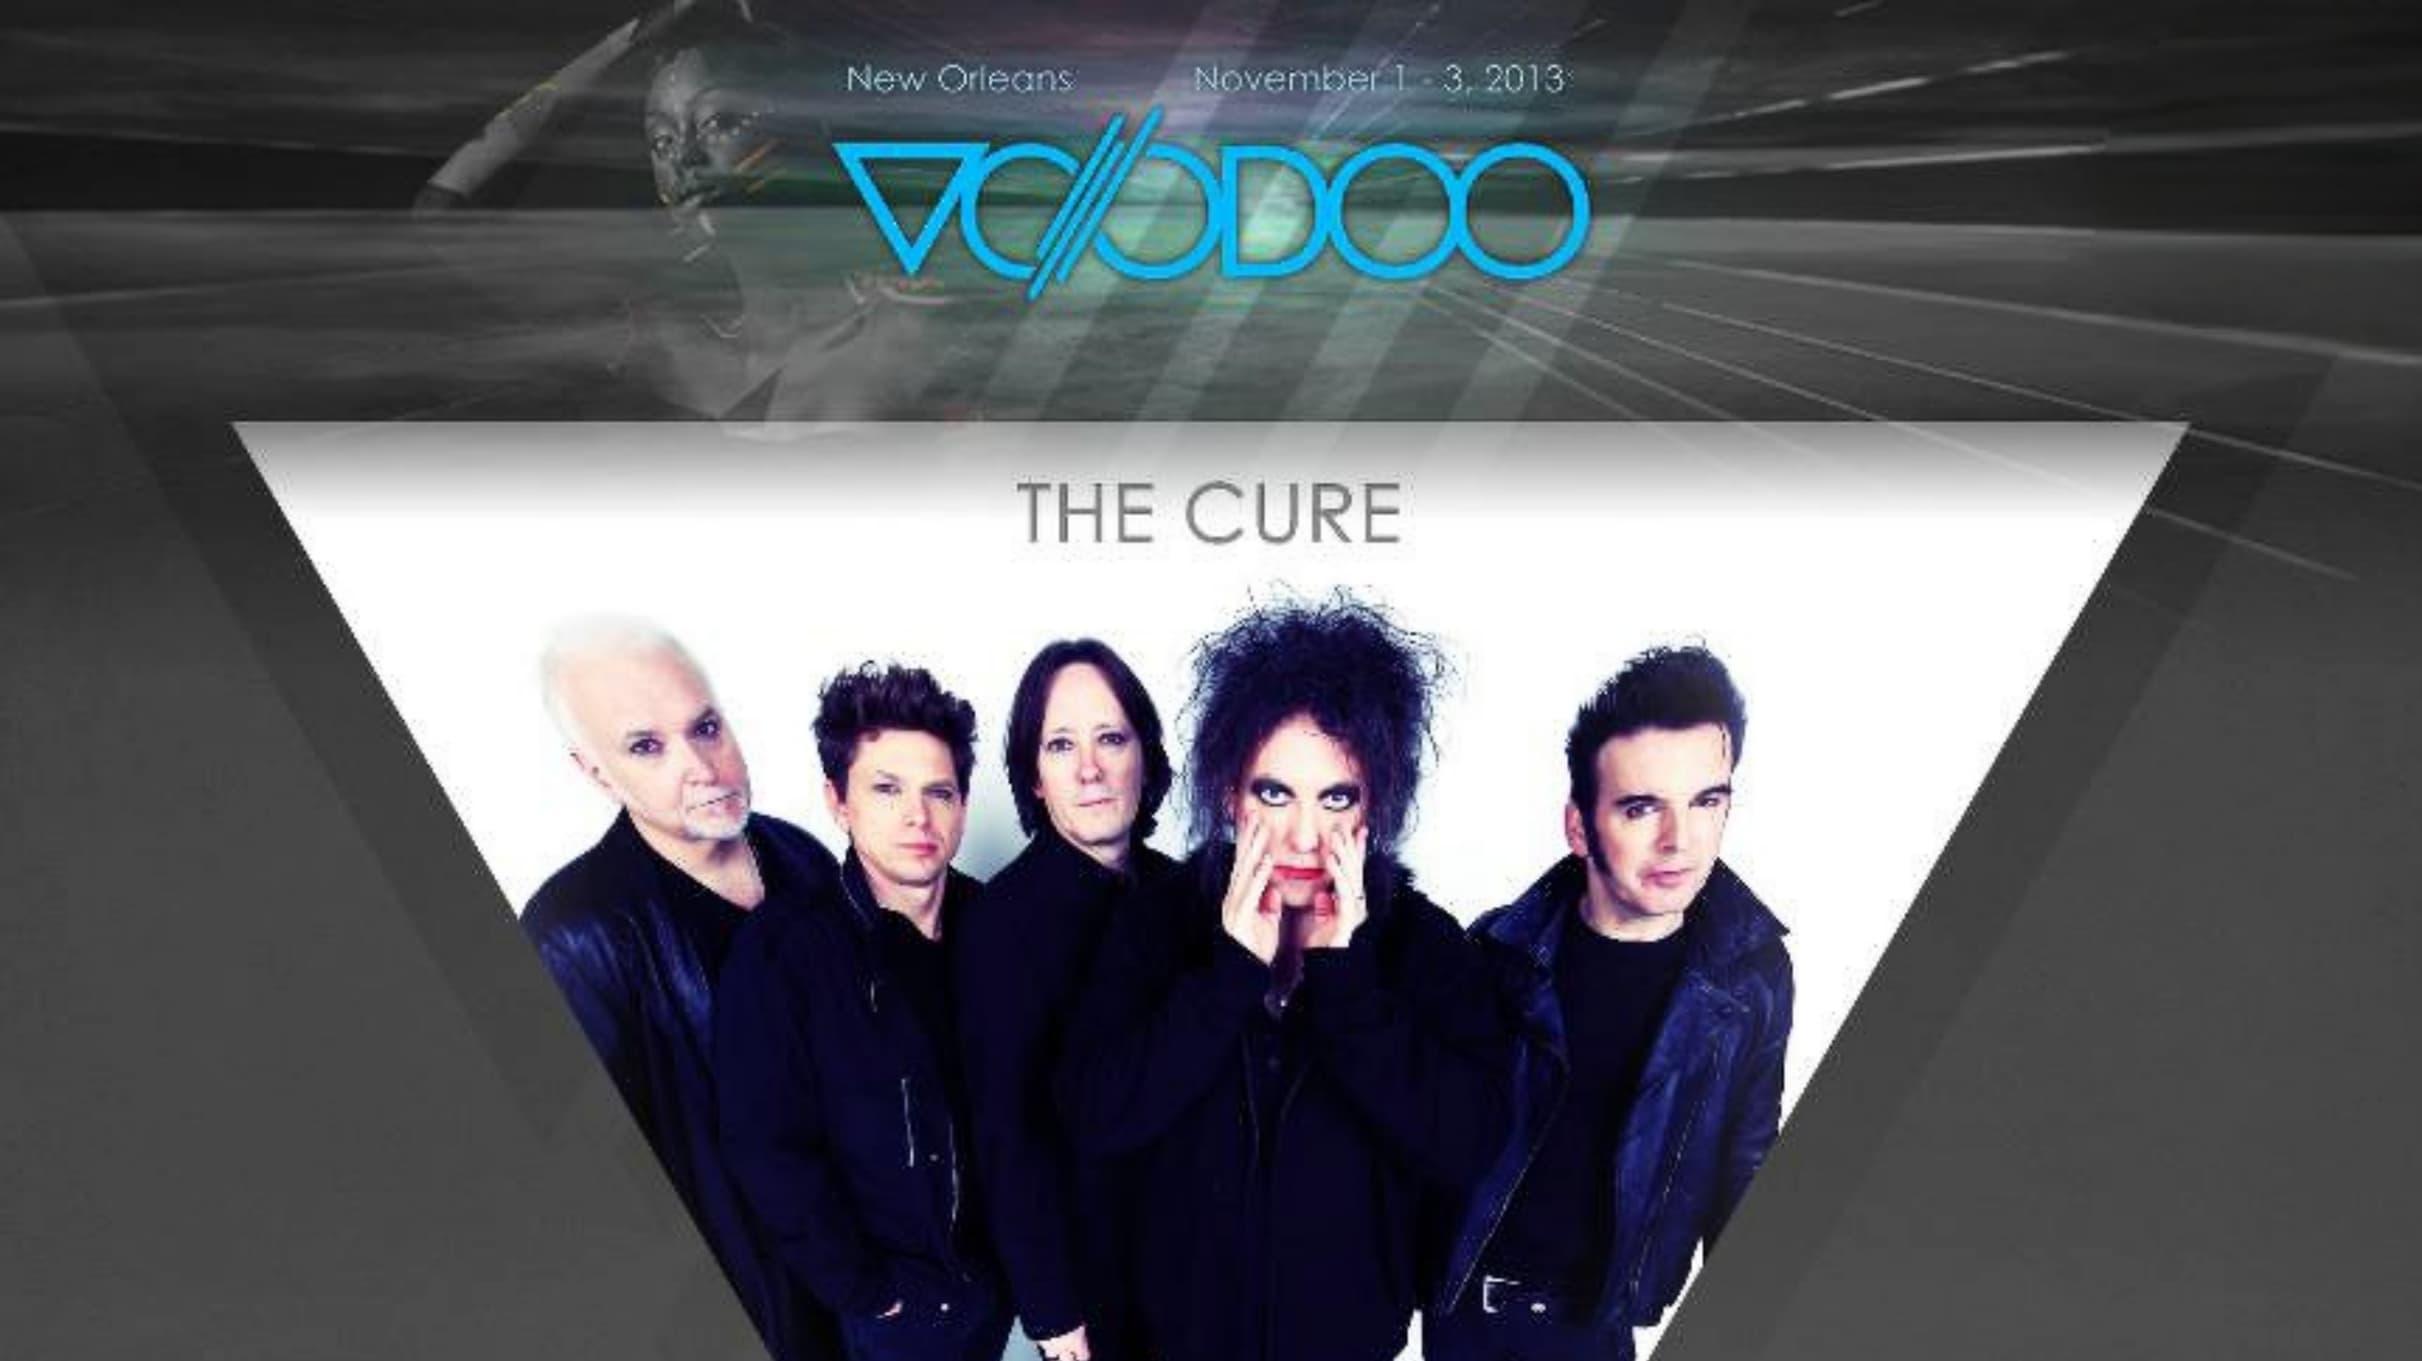 The Cure: Voodoo Festival Live backdrop